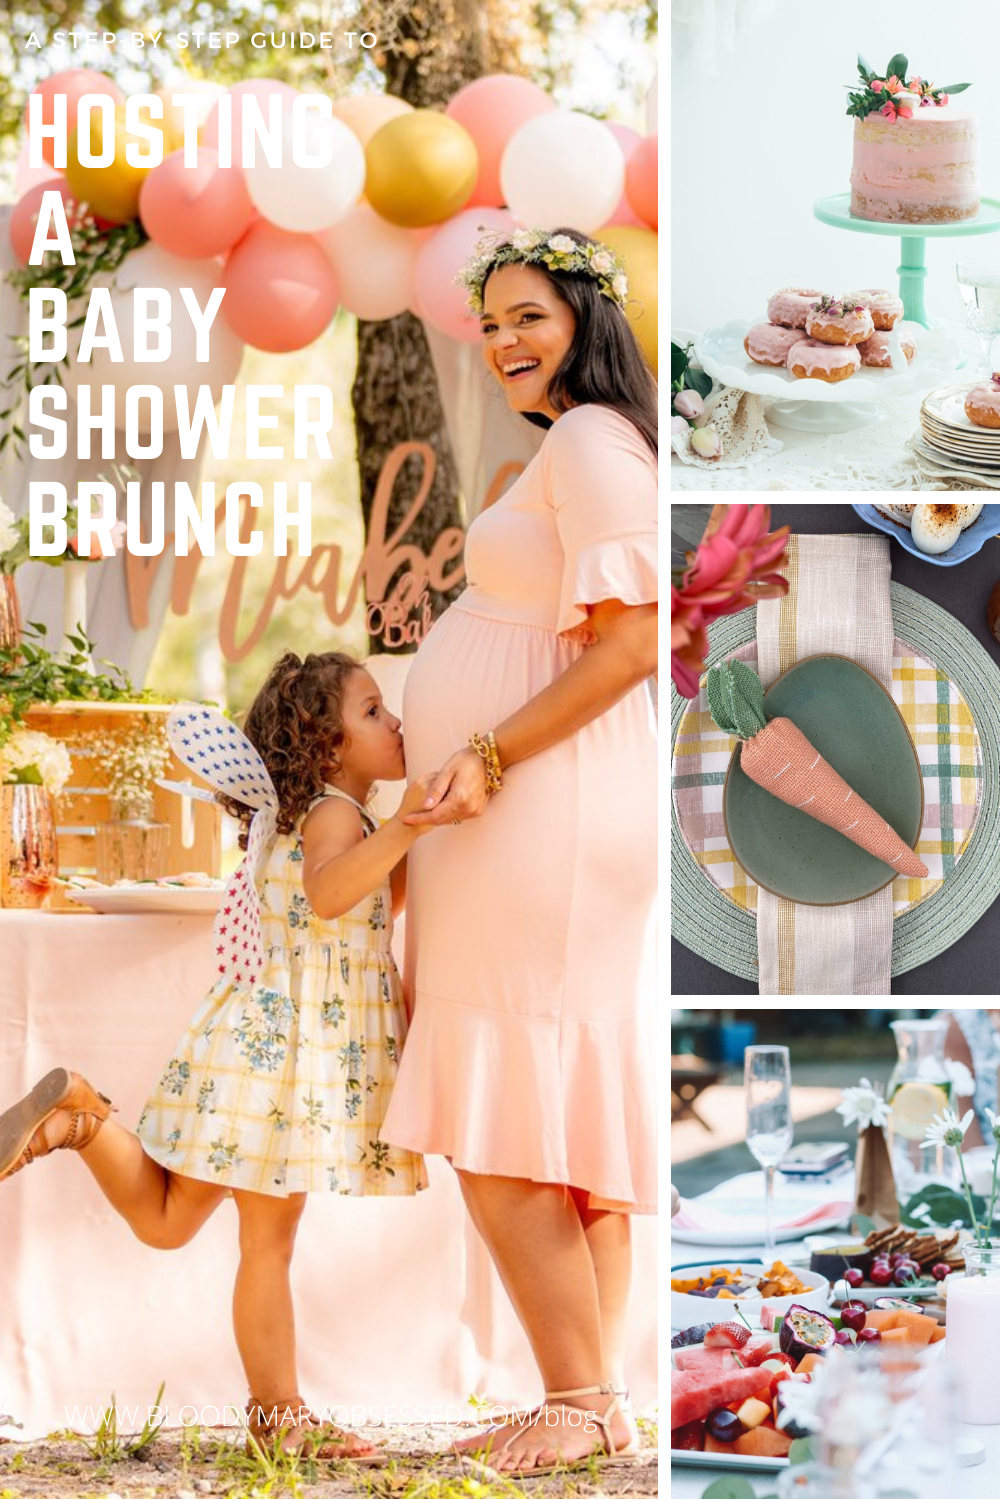 Guide to hosting a baby shower brunch